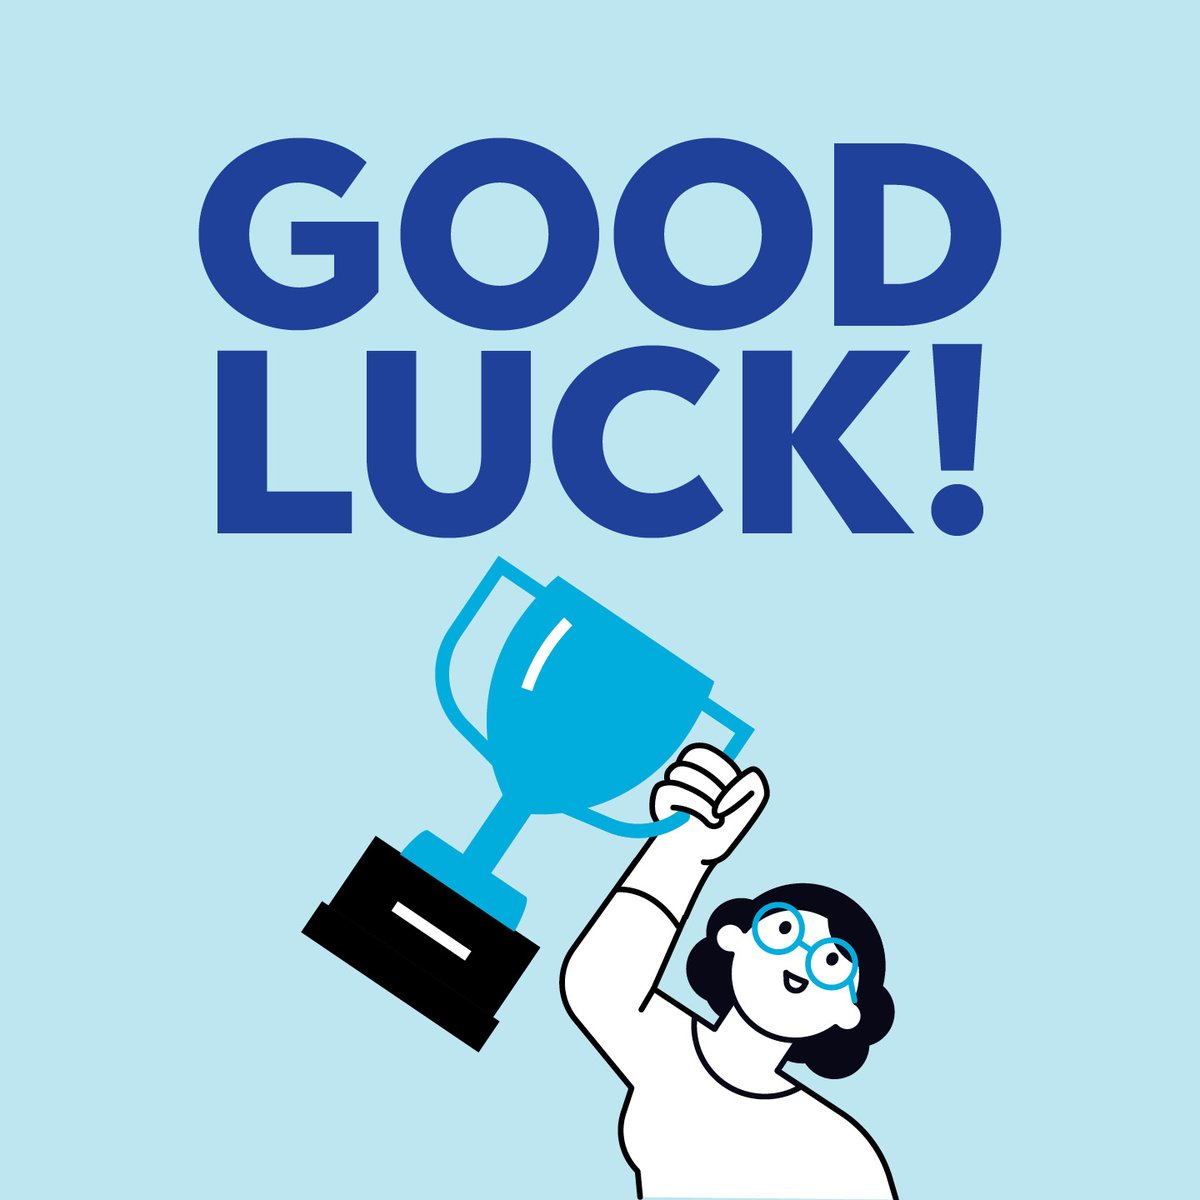 Good luck to all students taking their GCSE's this year. 🍀 Remember, you've got this! #MadeAtWorthing #GCSE #Exams